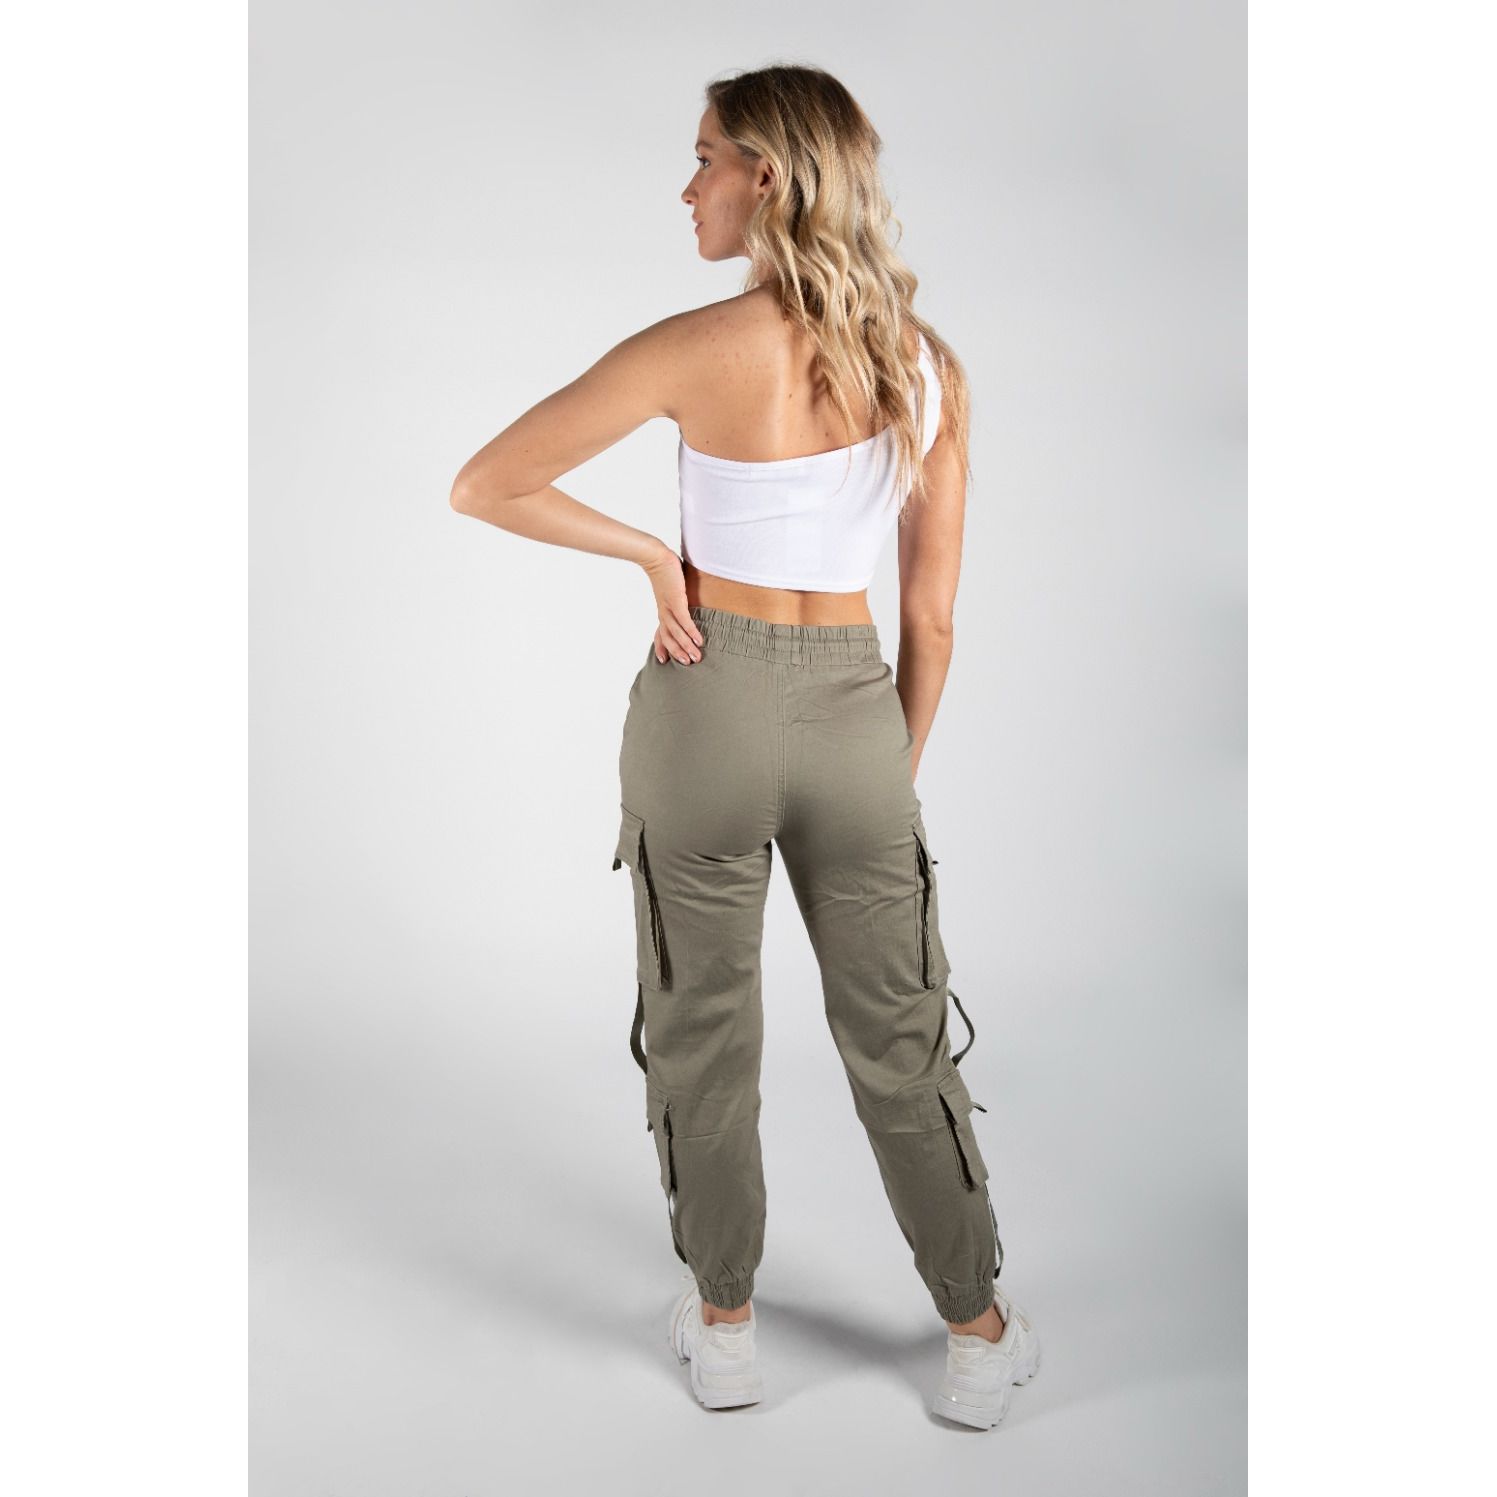 https://www.gowholesale.co.uk/images/thumbnails/1497/1497/detailed/43030/Khaki-Drawstring-Fitted-Cargo-Trousers-4.jpg